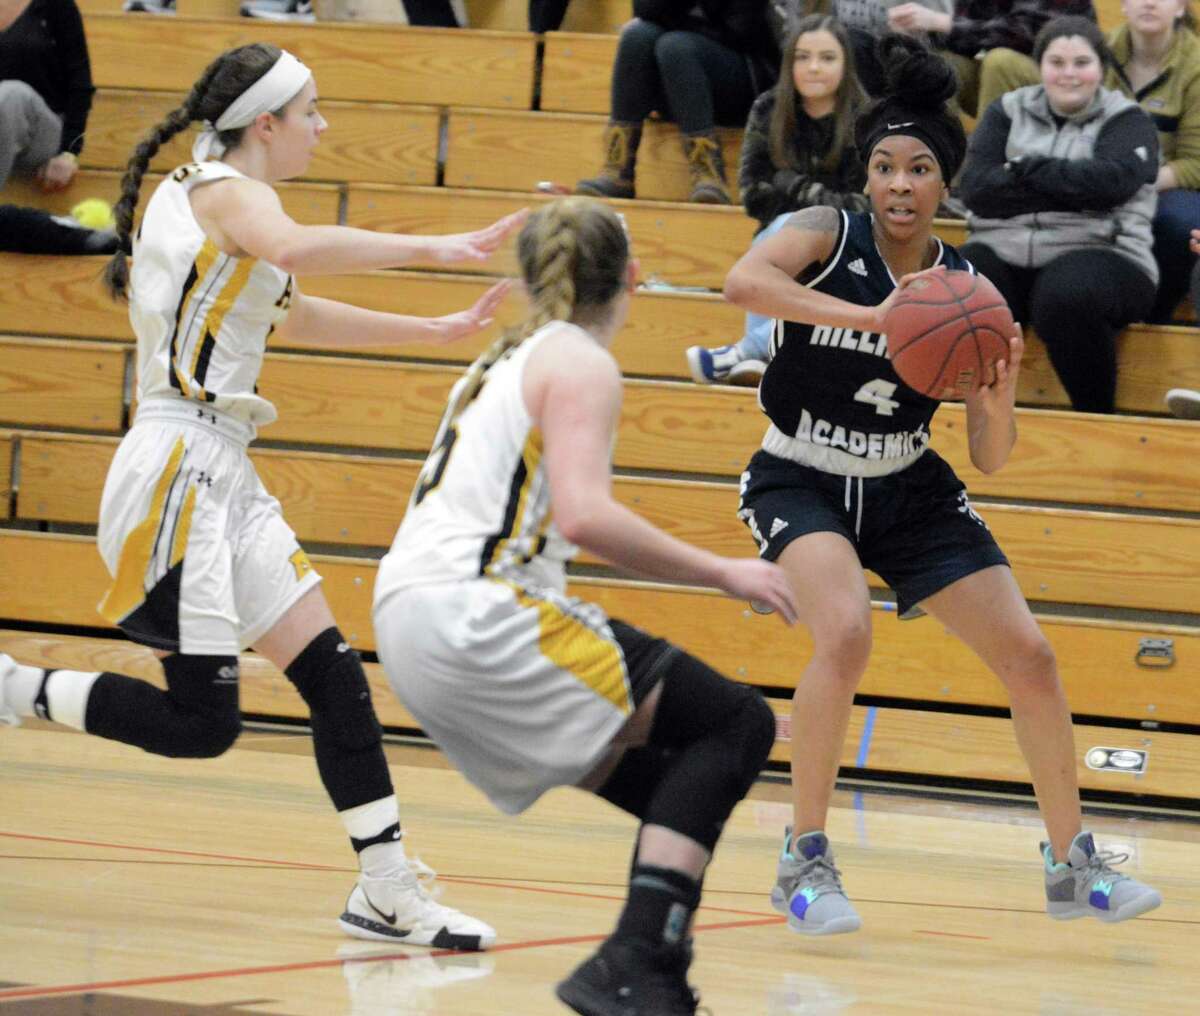 Hillhouse’s Ciara Little (4) looks to make a pass while defended by a pair of Amity defenders on Wednesday.